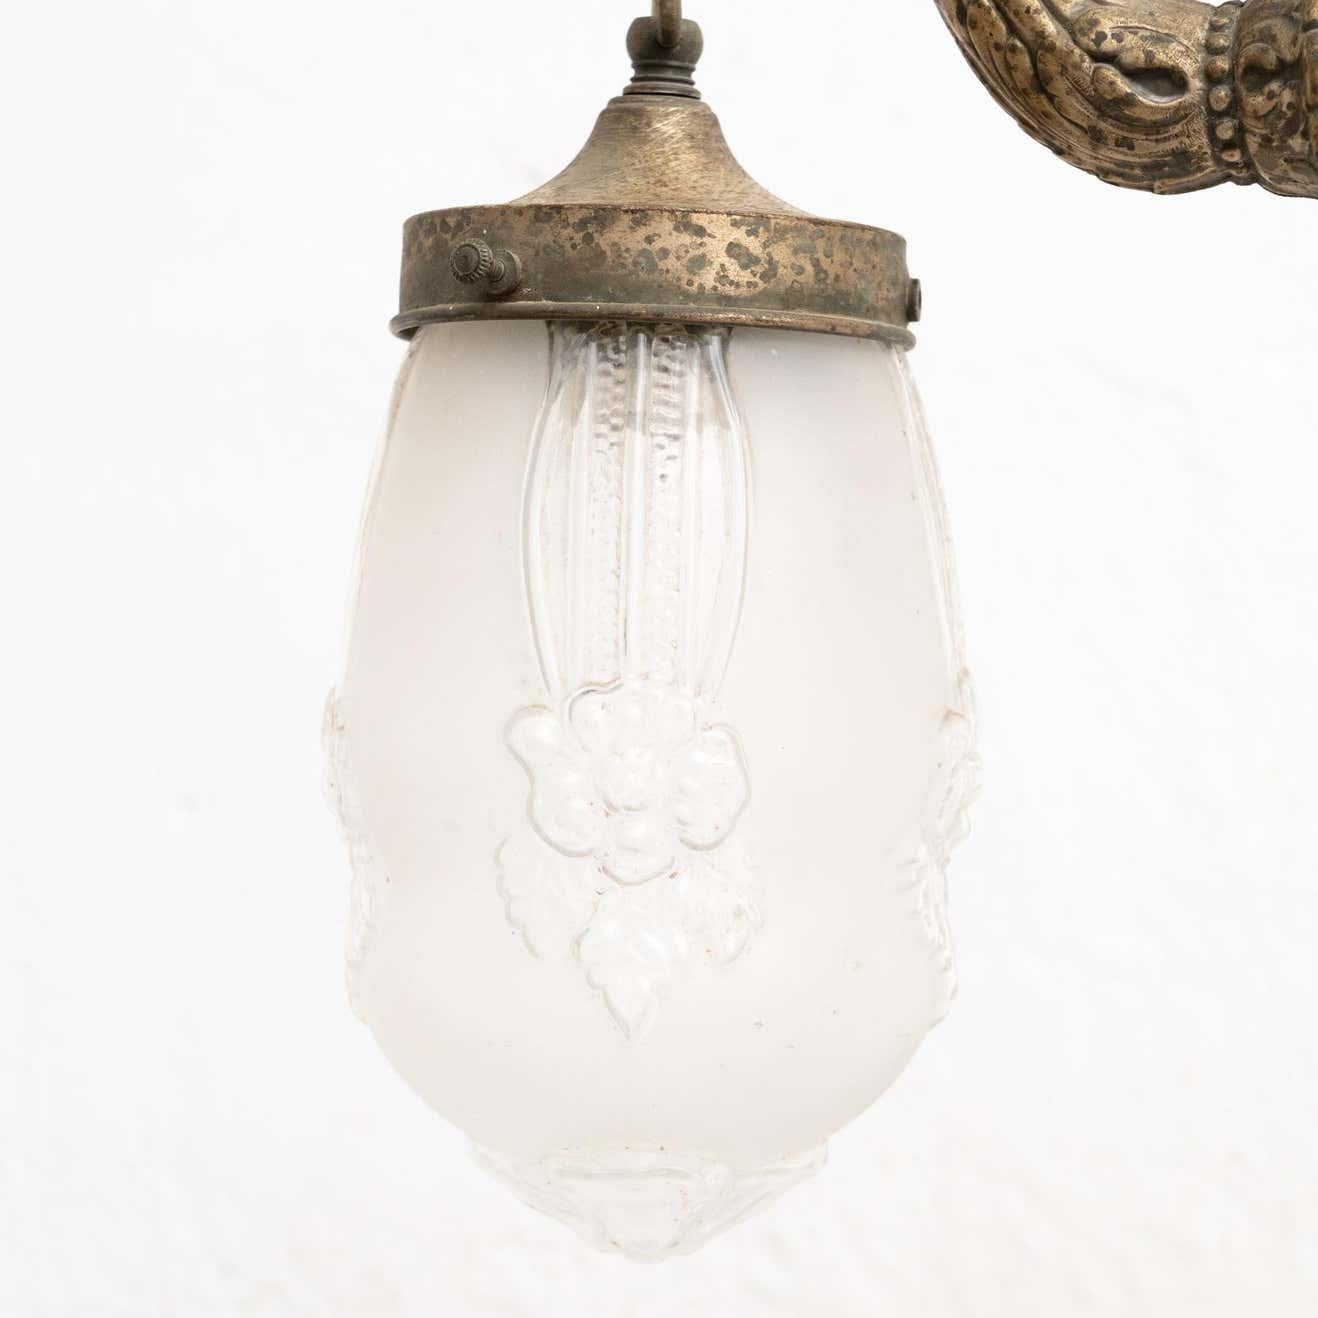 Vintage French Metal and Glass Ceiling Lamp, circa, 1930 For Sale 4